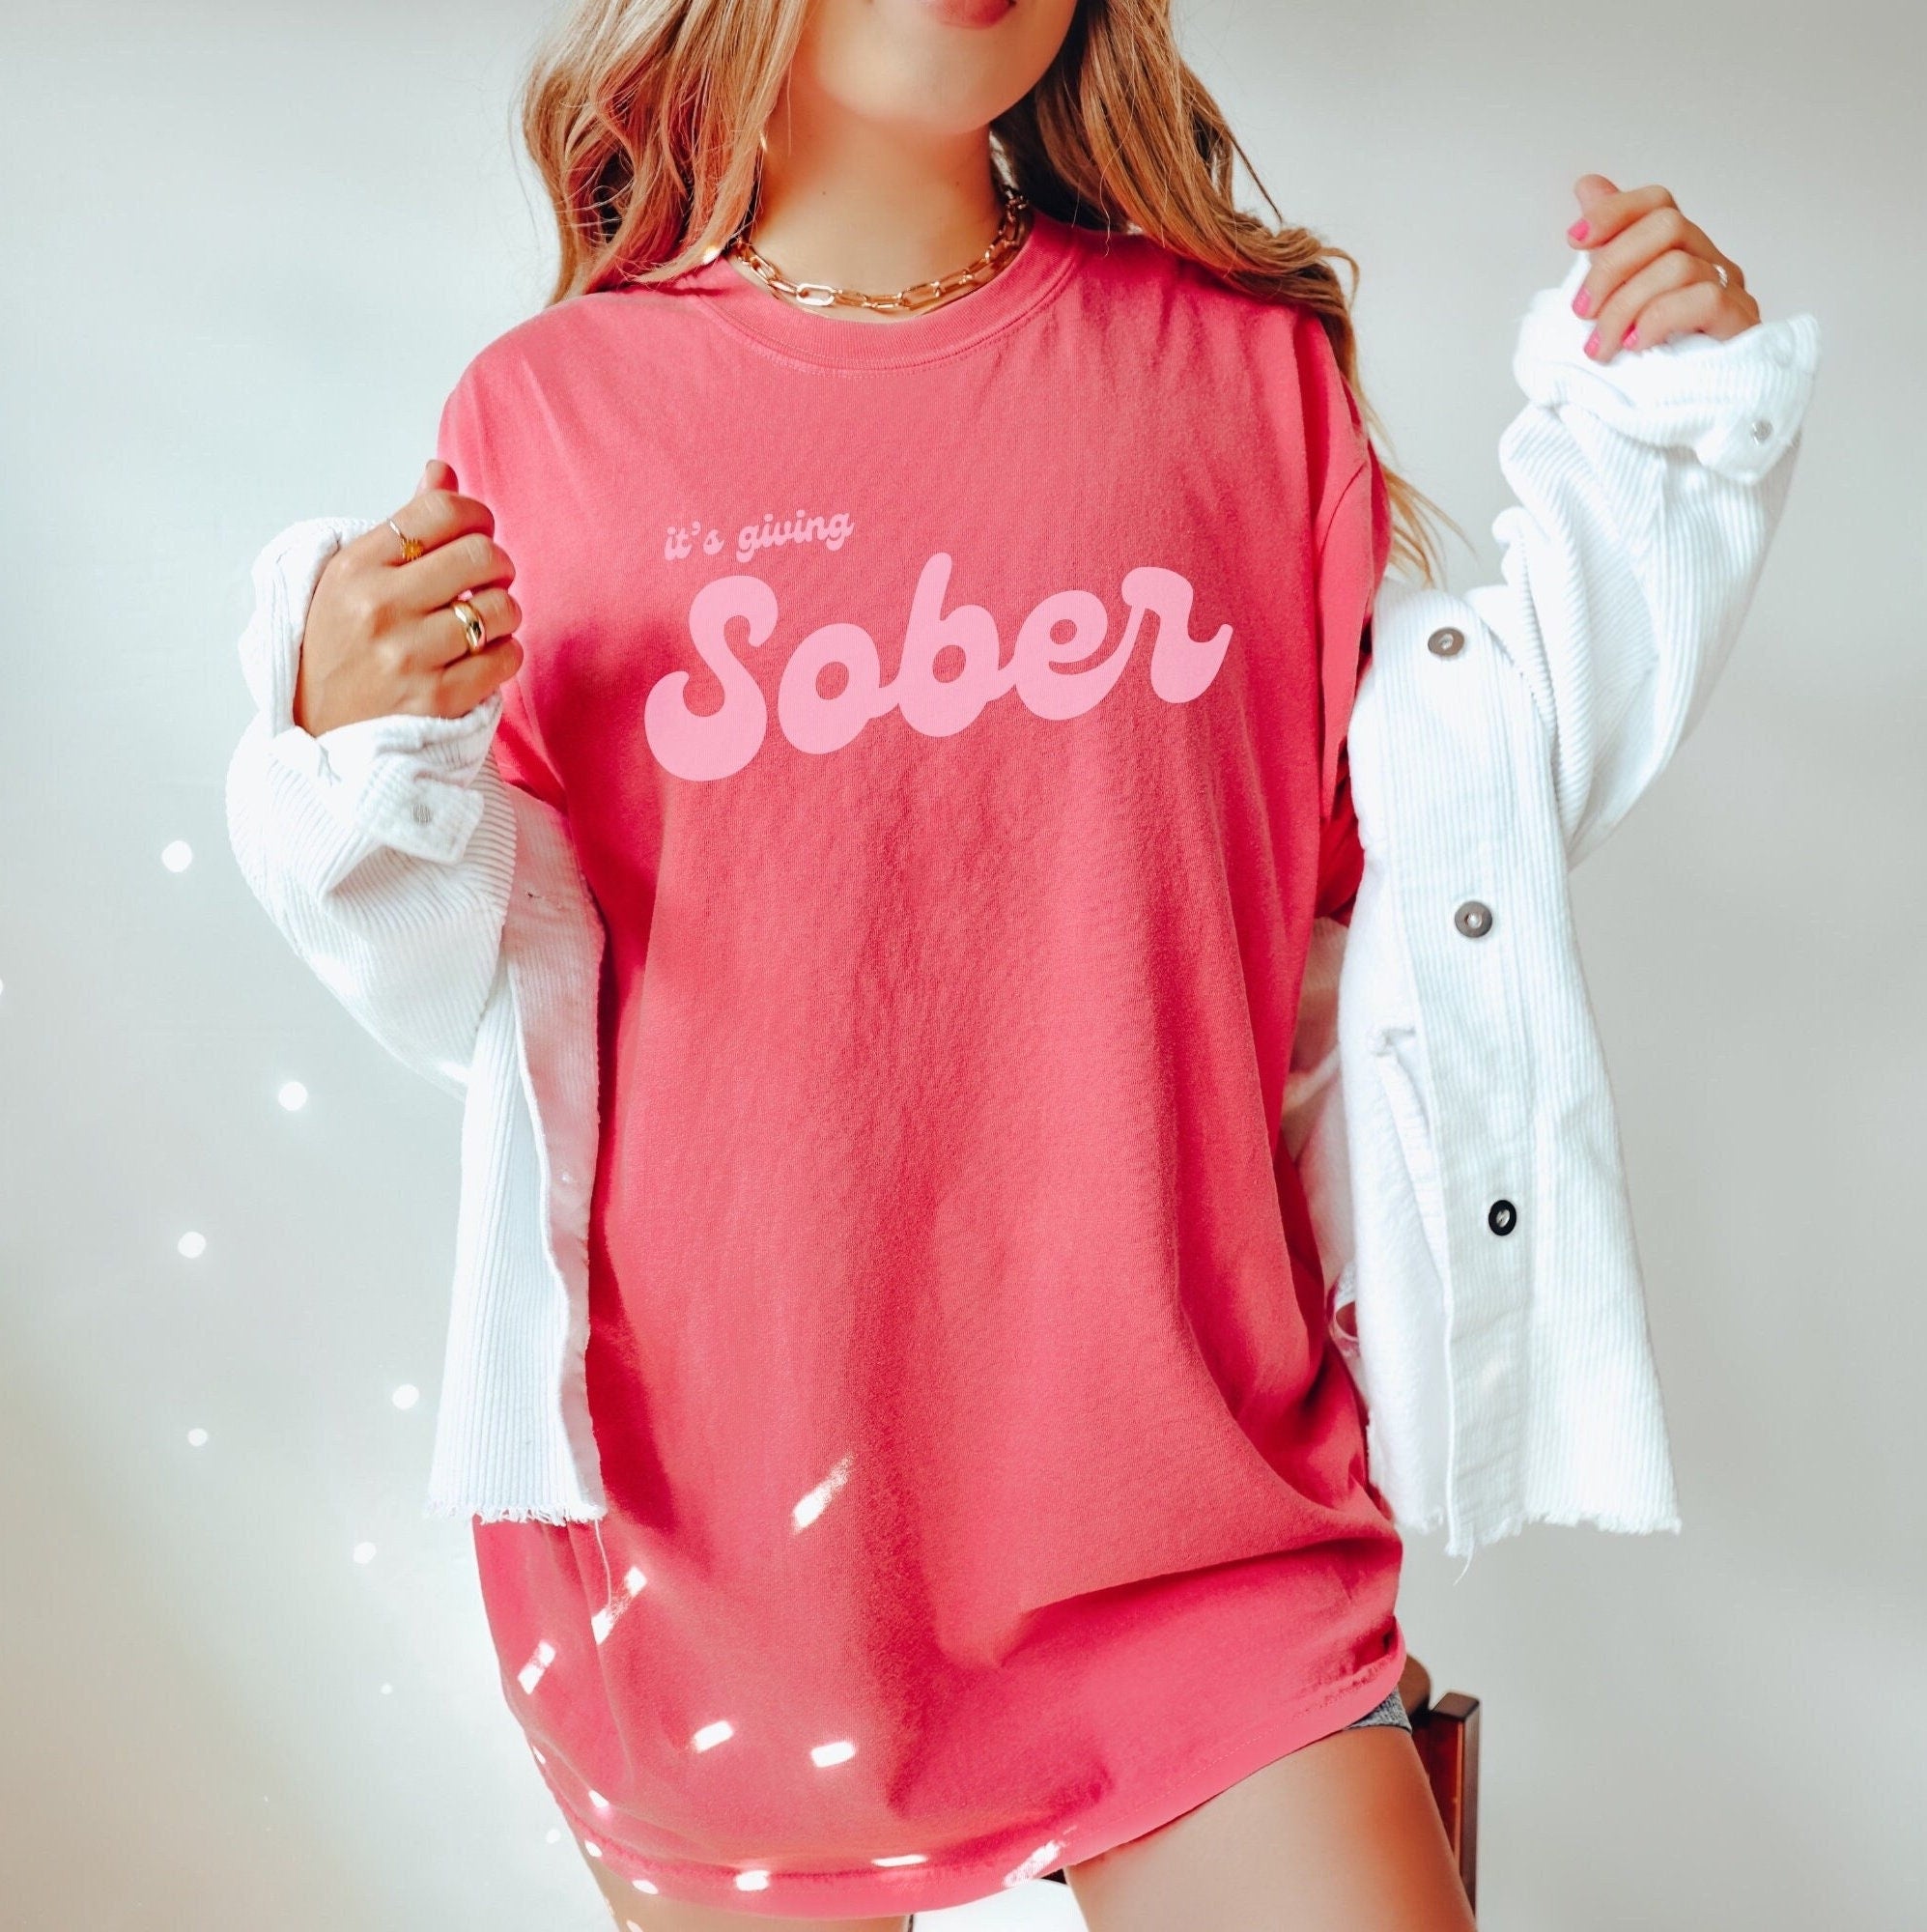 It's Giving Sober Sobriety Tshirt